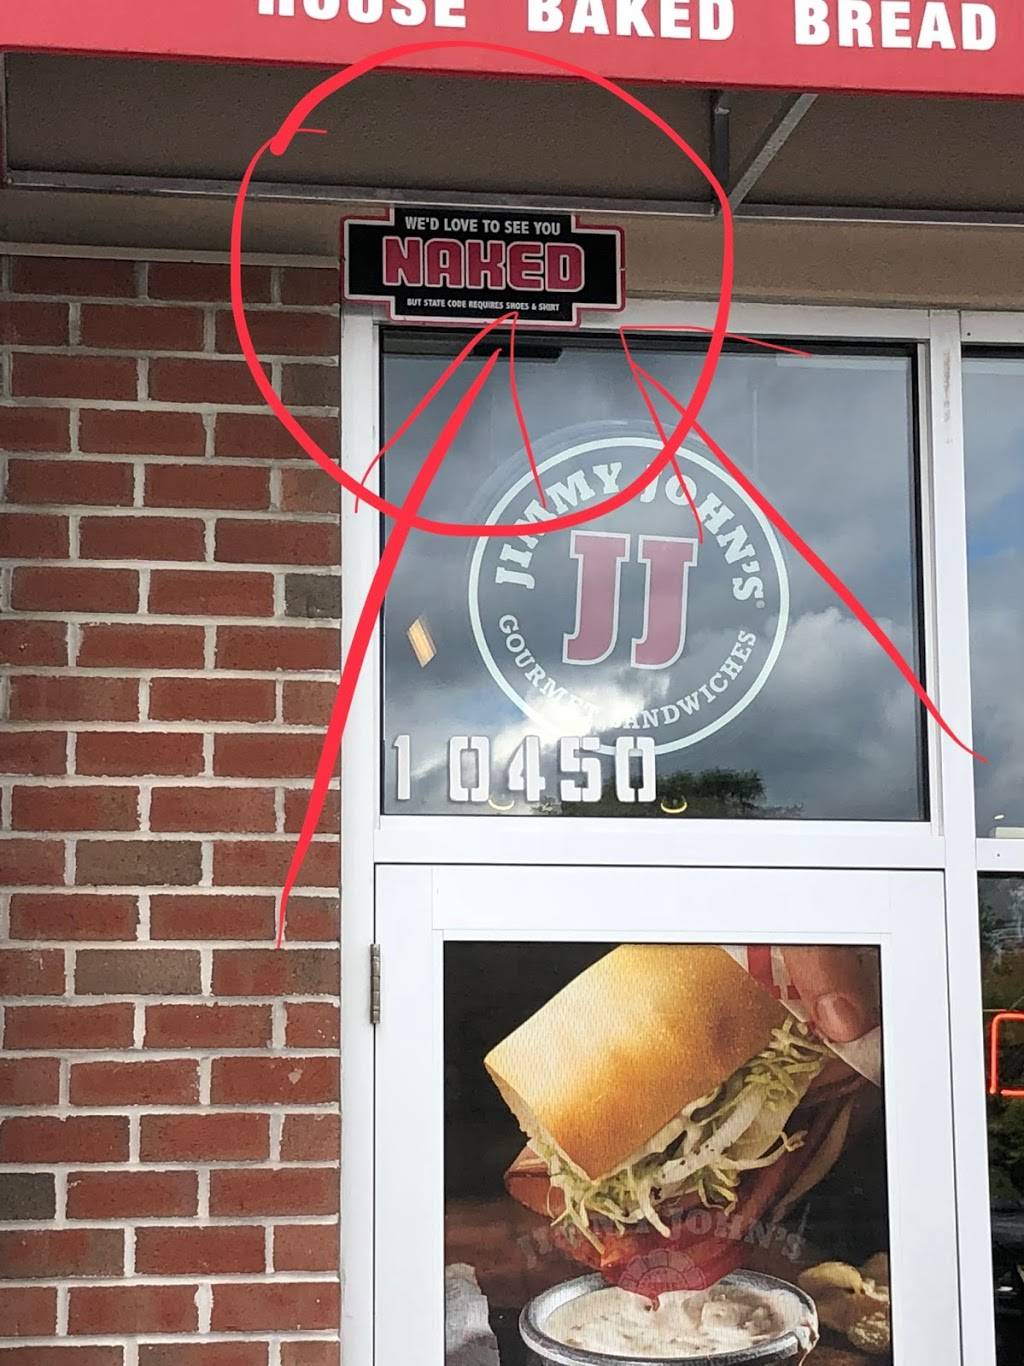 Jimmy Johns | meal delivery | 10450 Owings Mills Blvd Ste. 105, Owings Mills, MD 21117, USA | 4105813050 OR +1 410-581-3050